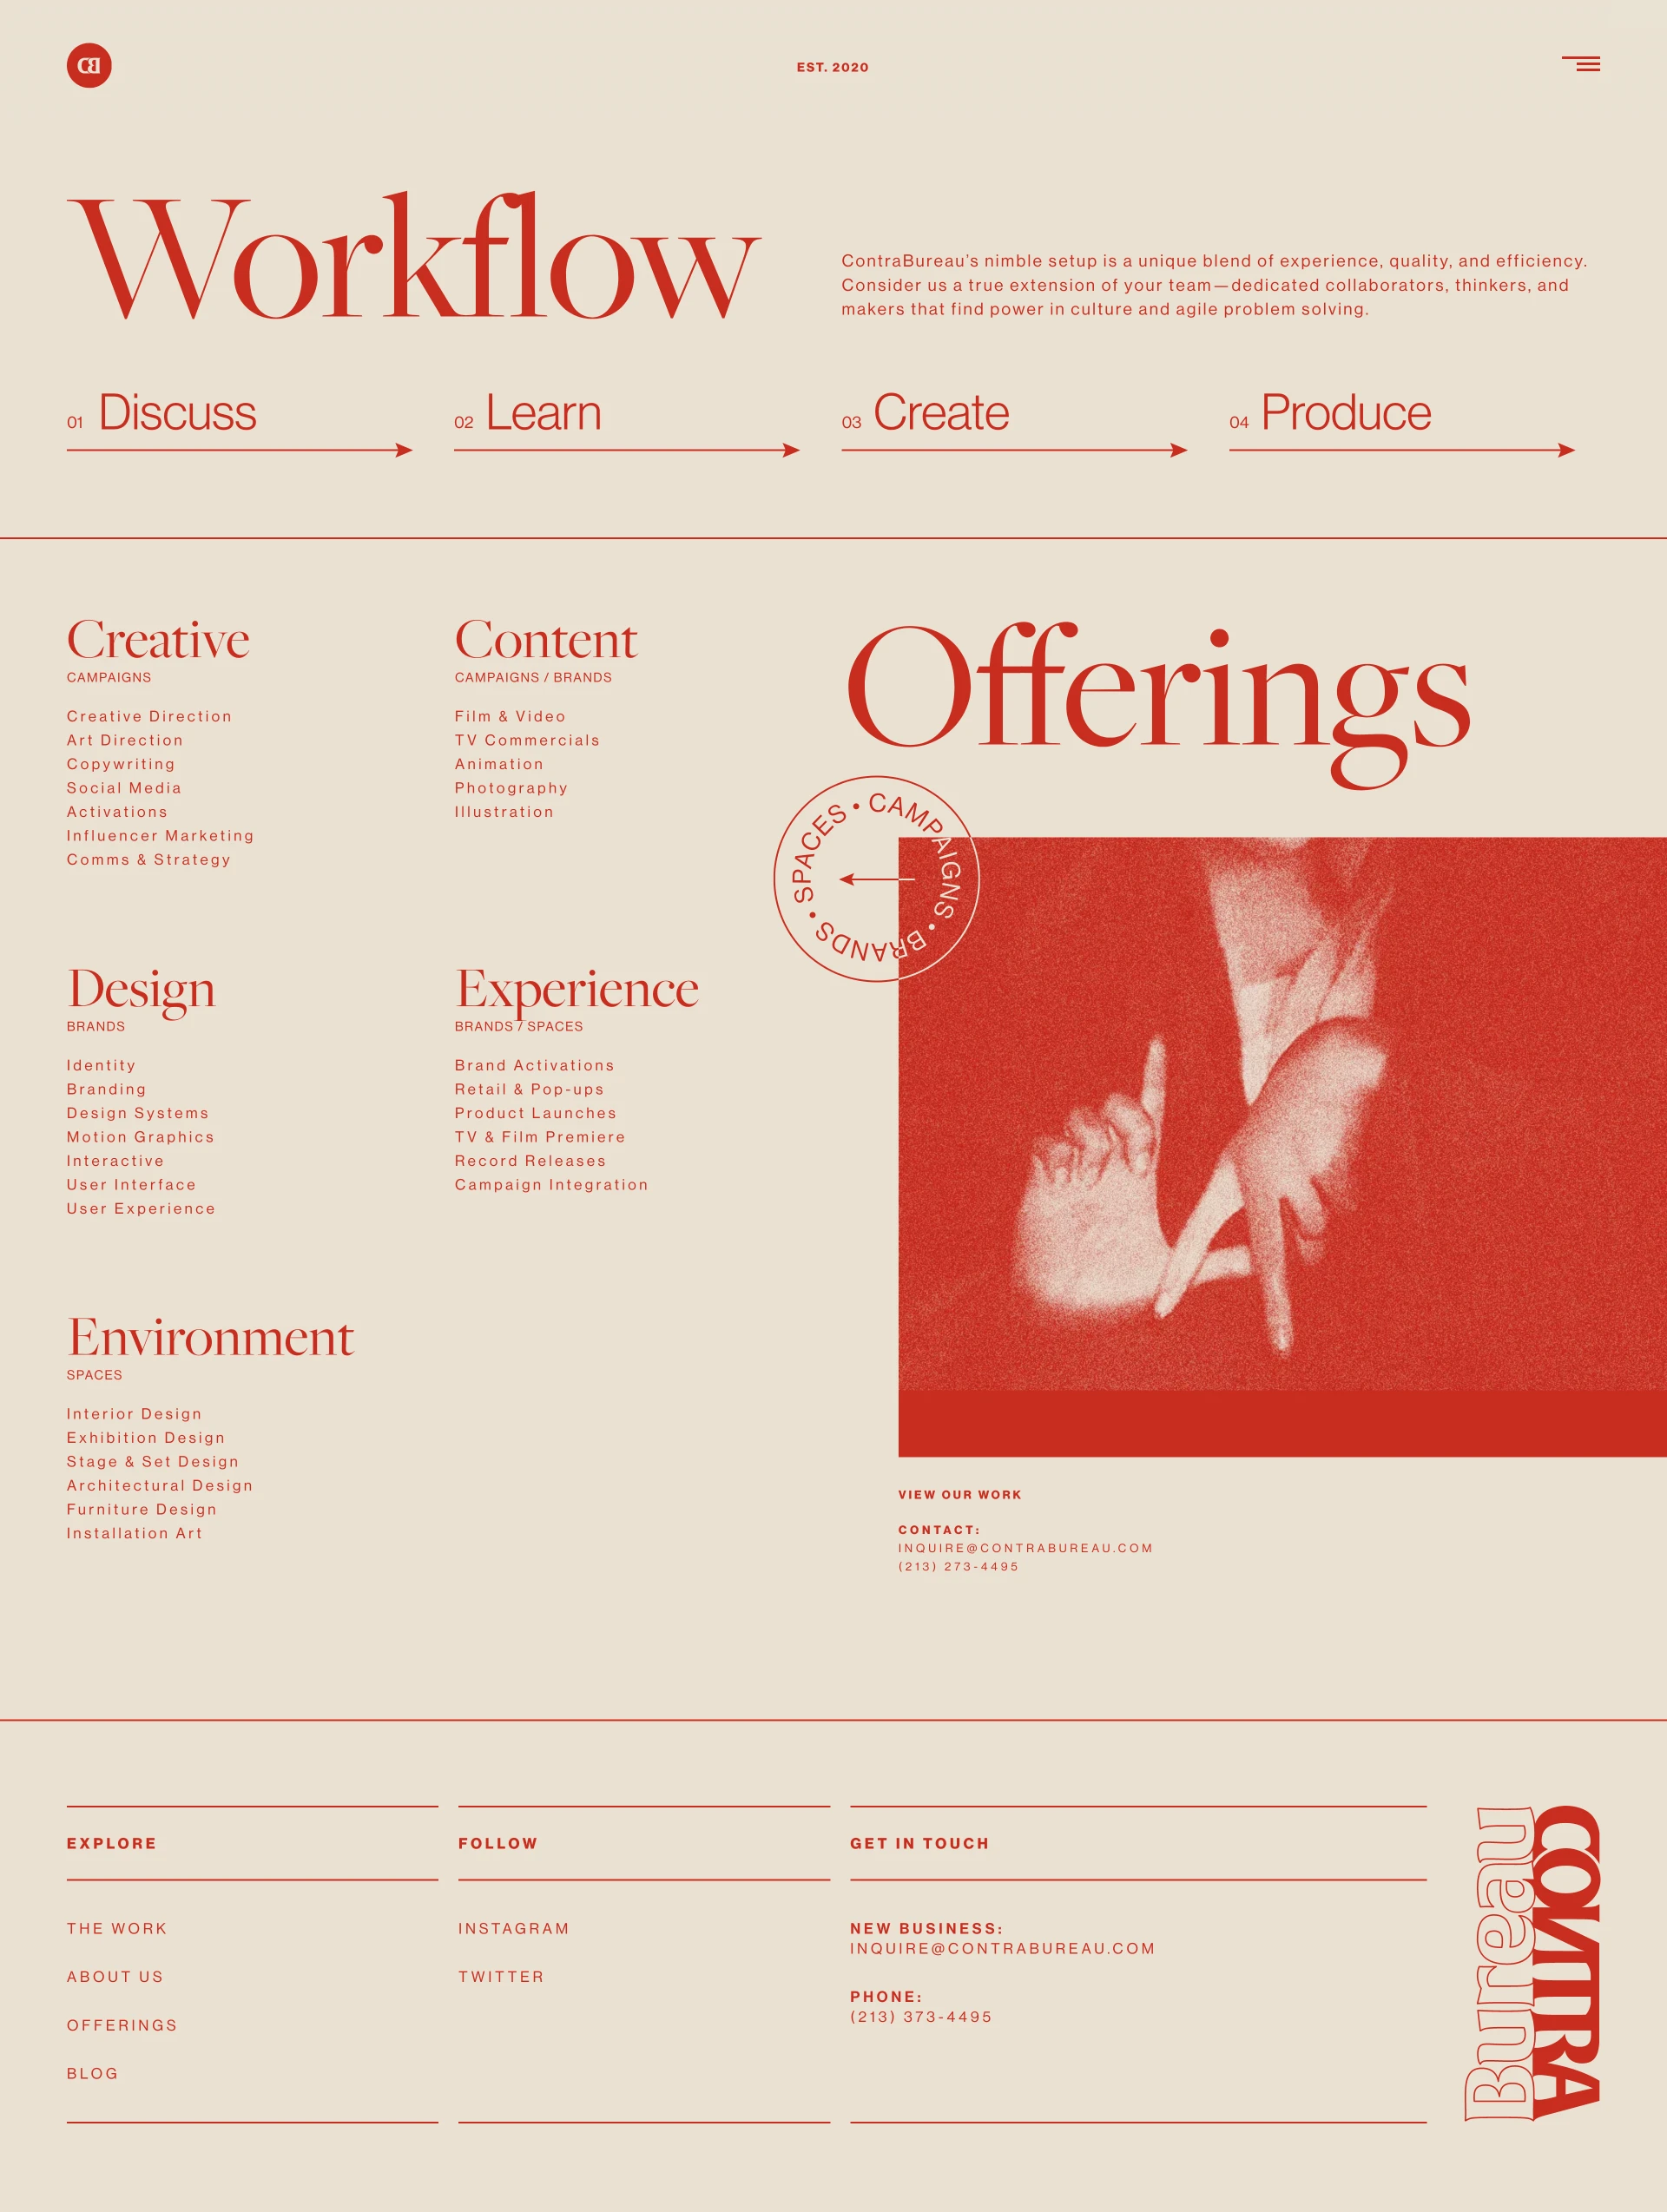 ContraBureau Landing Page Example: A multidisciplinary creative studio specializing in campaigns, brands, and spaces.